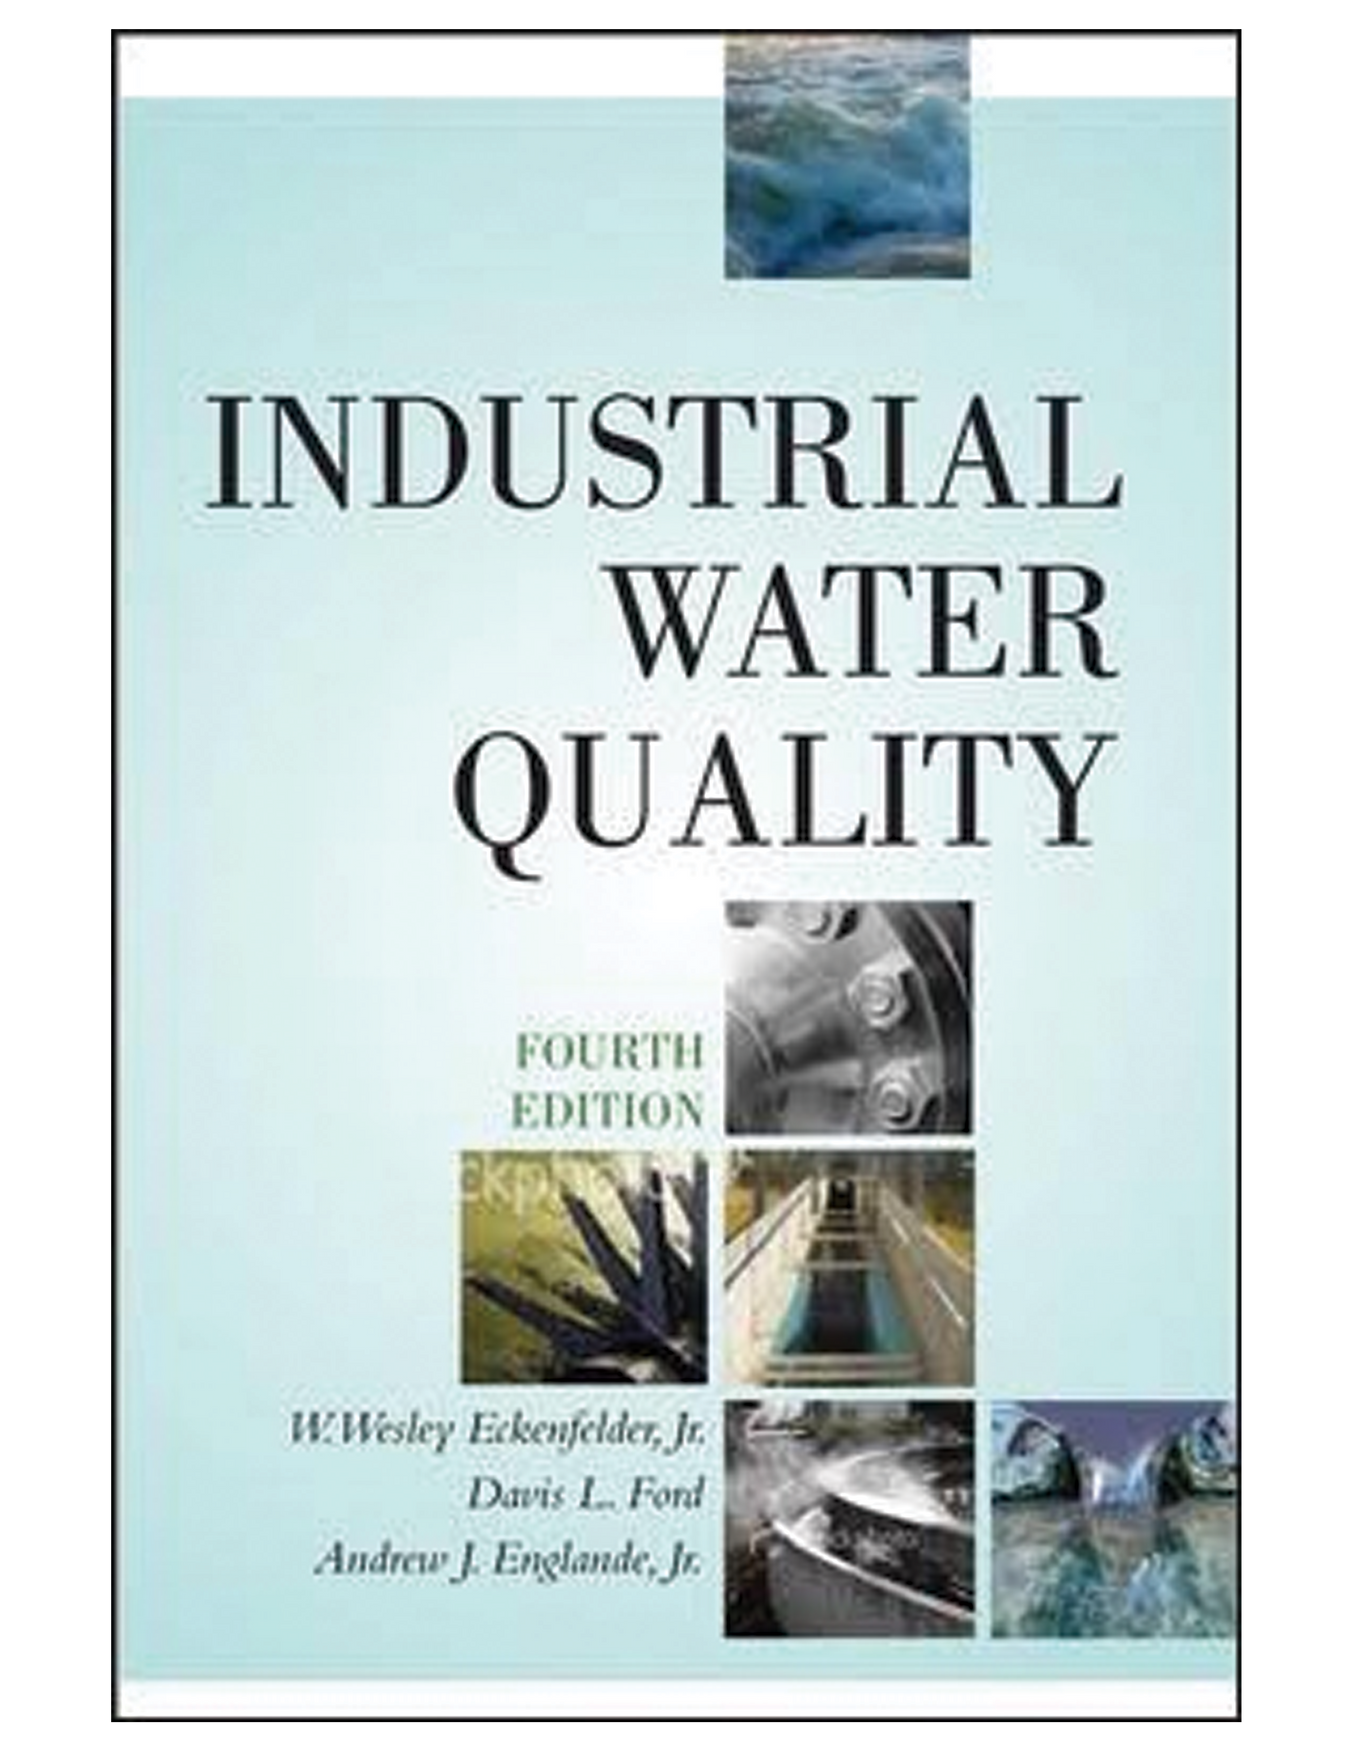 Water and Wastewater Management and Design